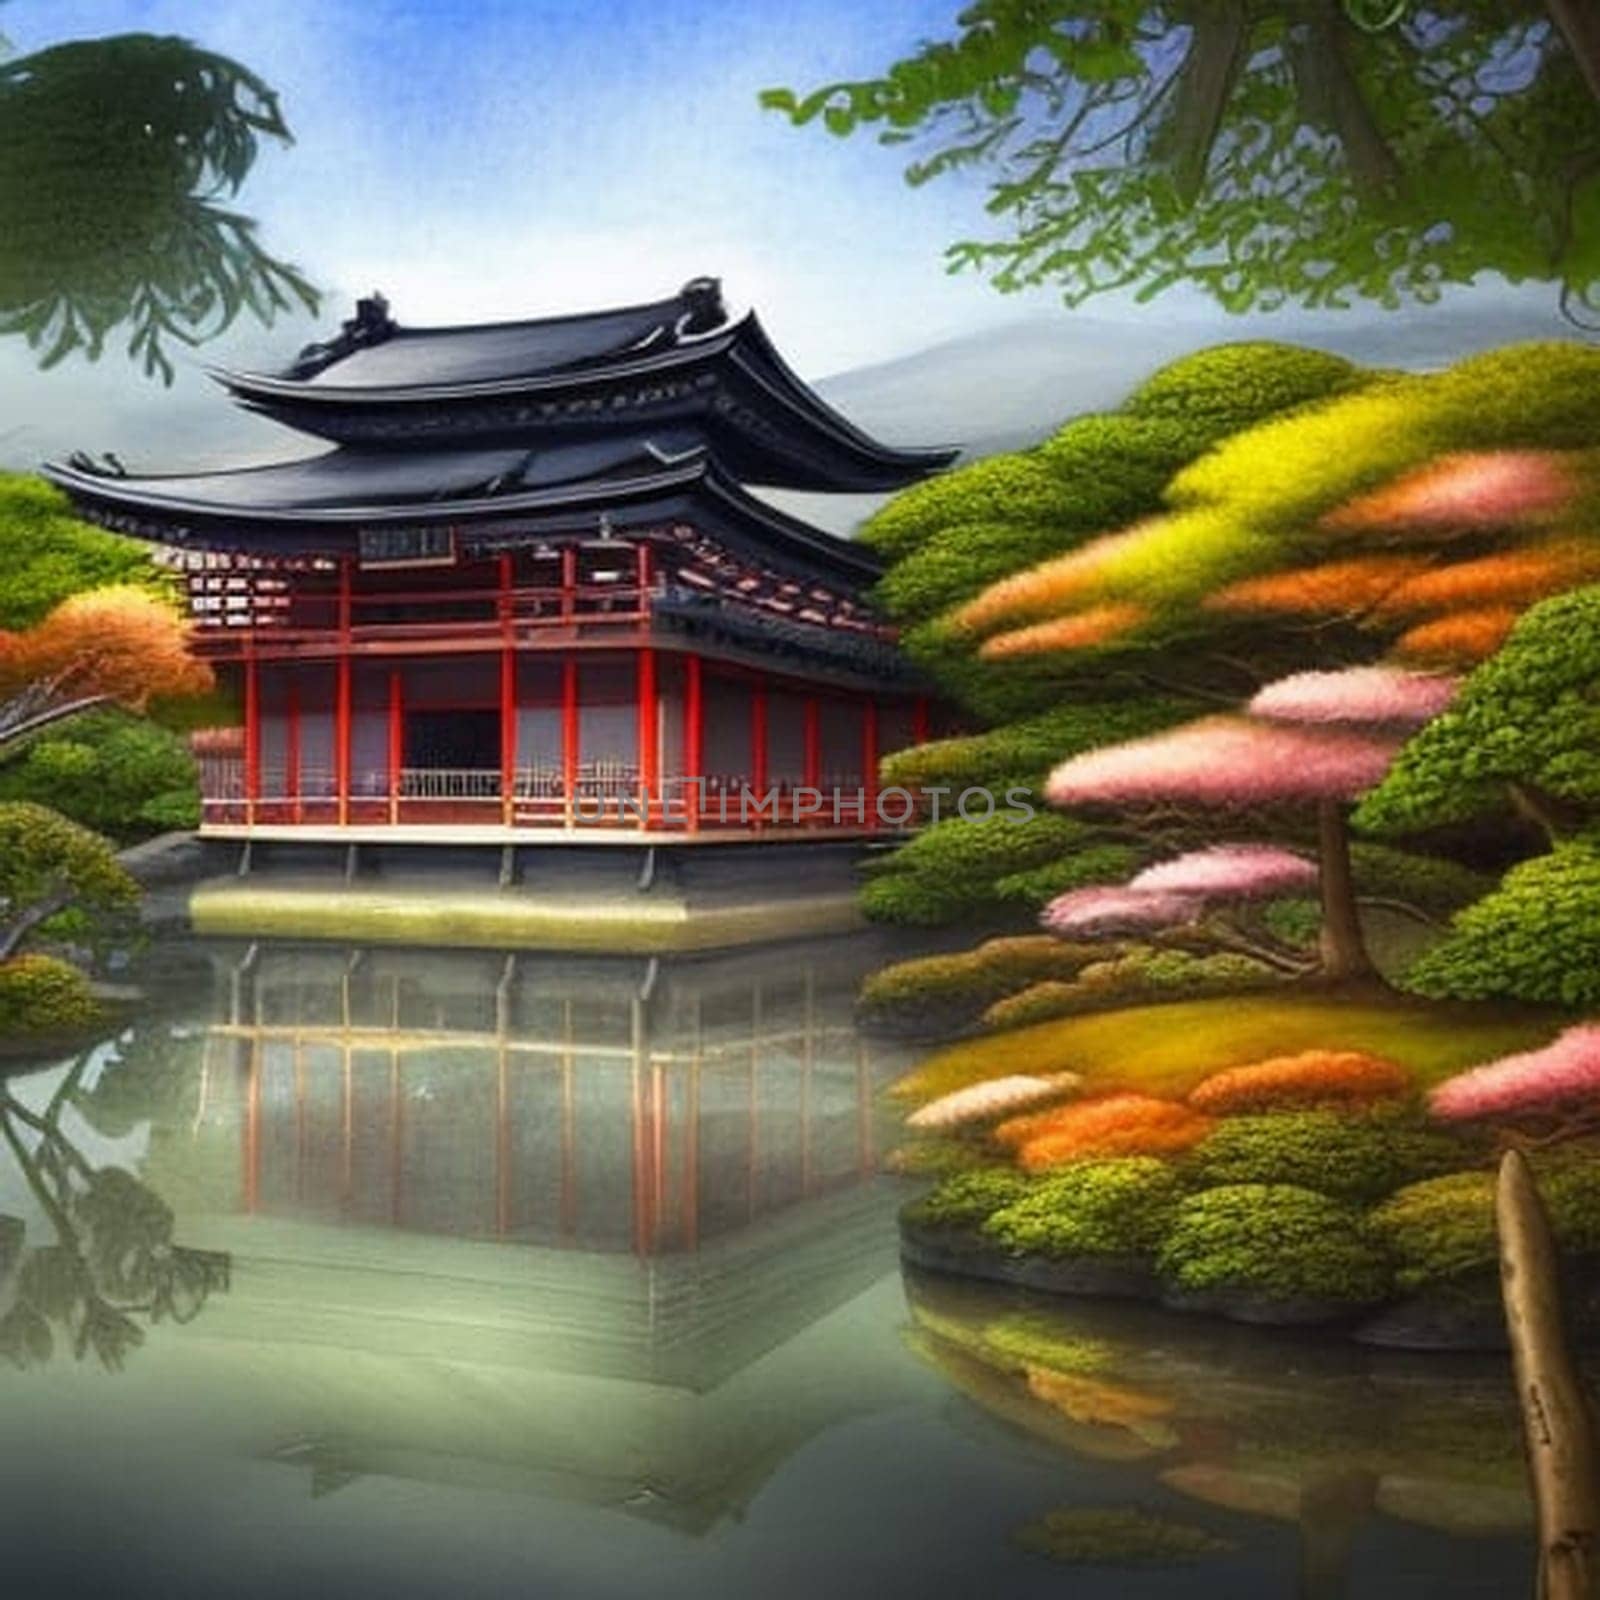 Immerse yourself in the serenity of a picturesque Japanese house nestled by a tranquil pond, embraced by a lush garden. The exquisite beauty of this typical Japanese dwelling is enhanced by its reflection, creating a captivating and tranquil scene. Verdant vegetation and gracefully swaying trees frame this idyllic setting, evoking a sense of peace and harmony. AI generated.